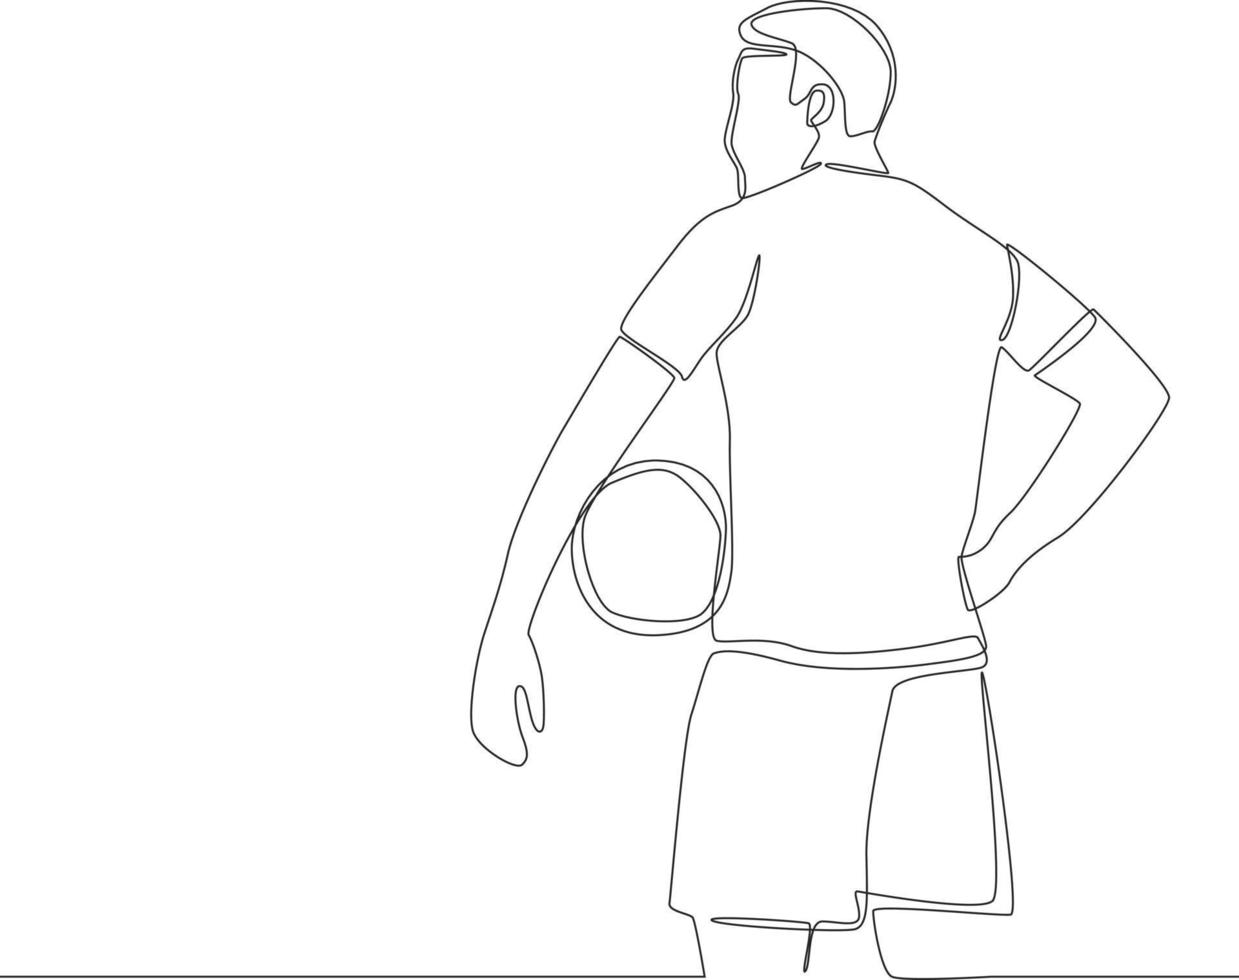 Continuous one line drawing of From back portrait a soccer player holding a football isolated on white background.  Modern single line draw design vector graphic illustration.